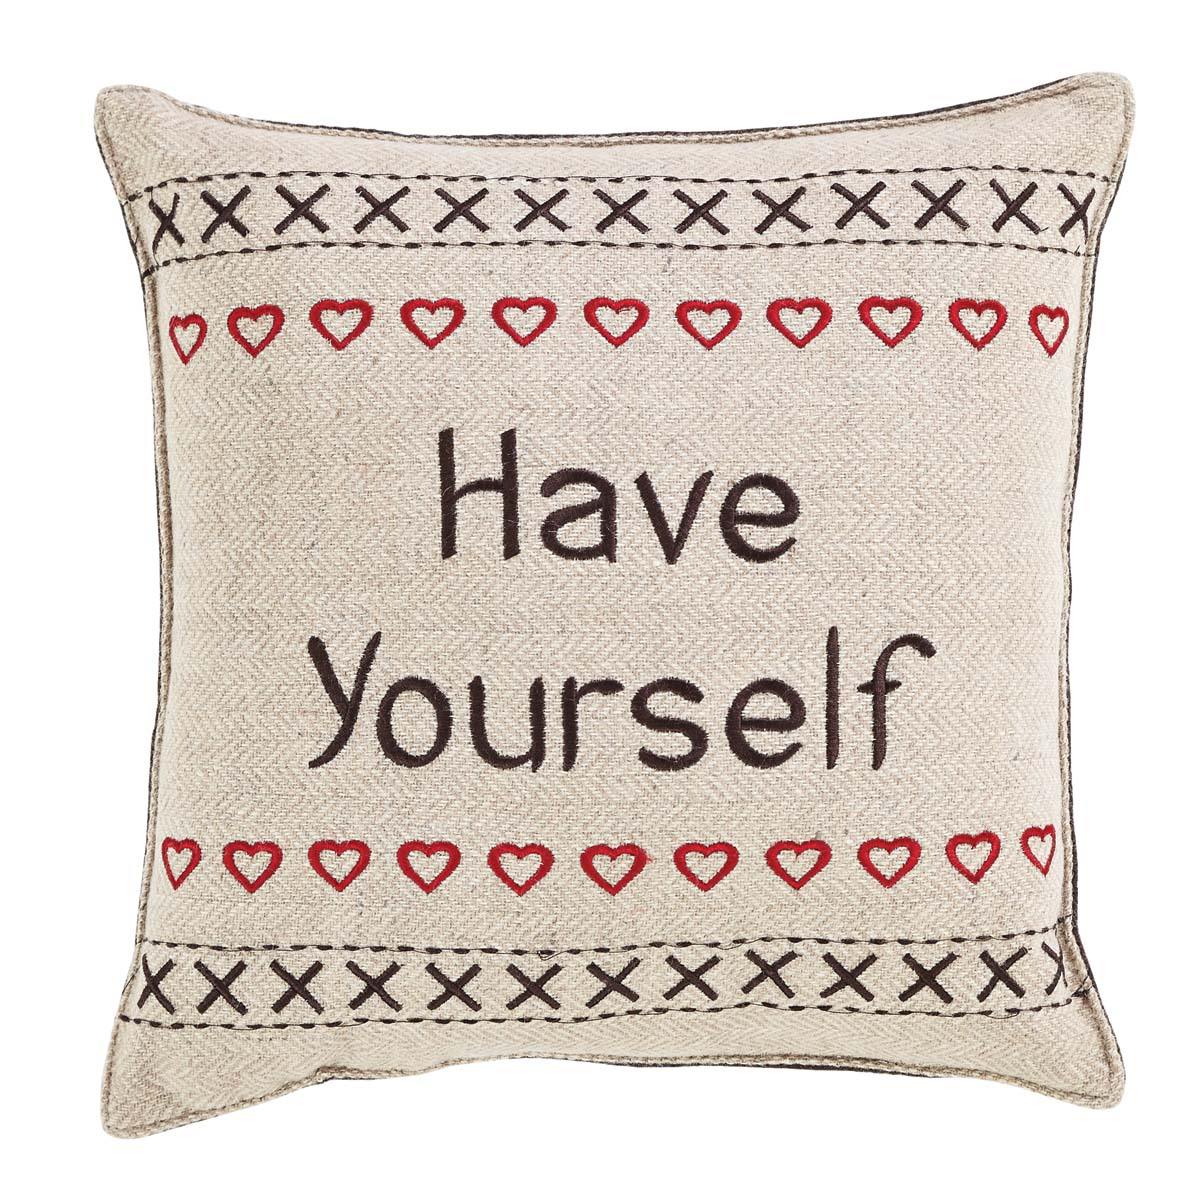 Merry Little Christmas Pillow Have Yourself A Set of 2 12x12 - The Fox Decor